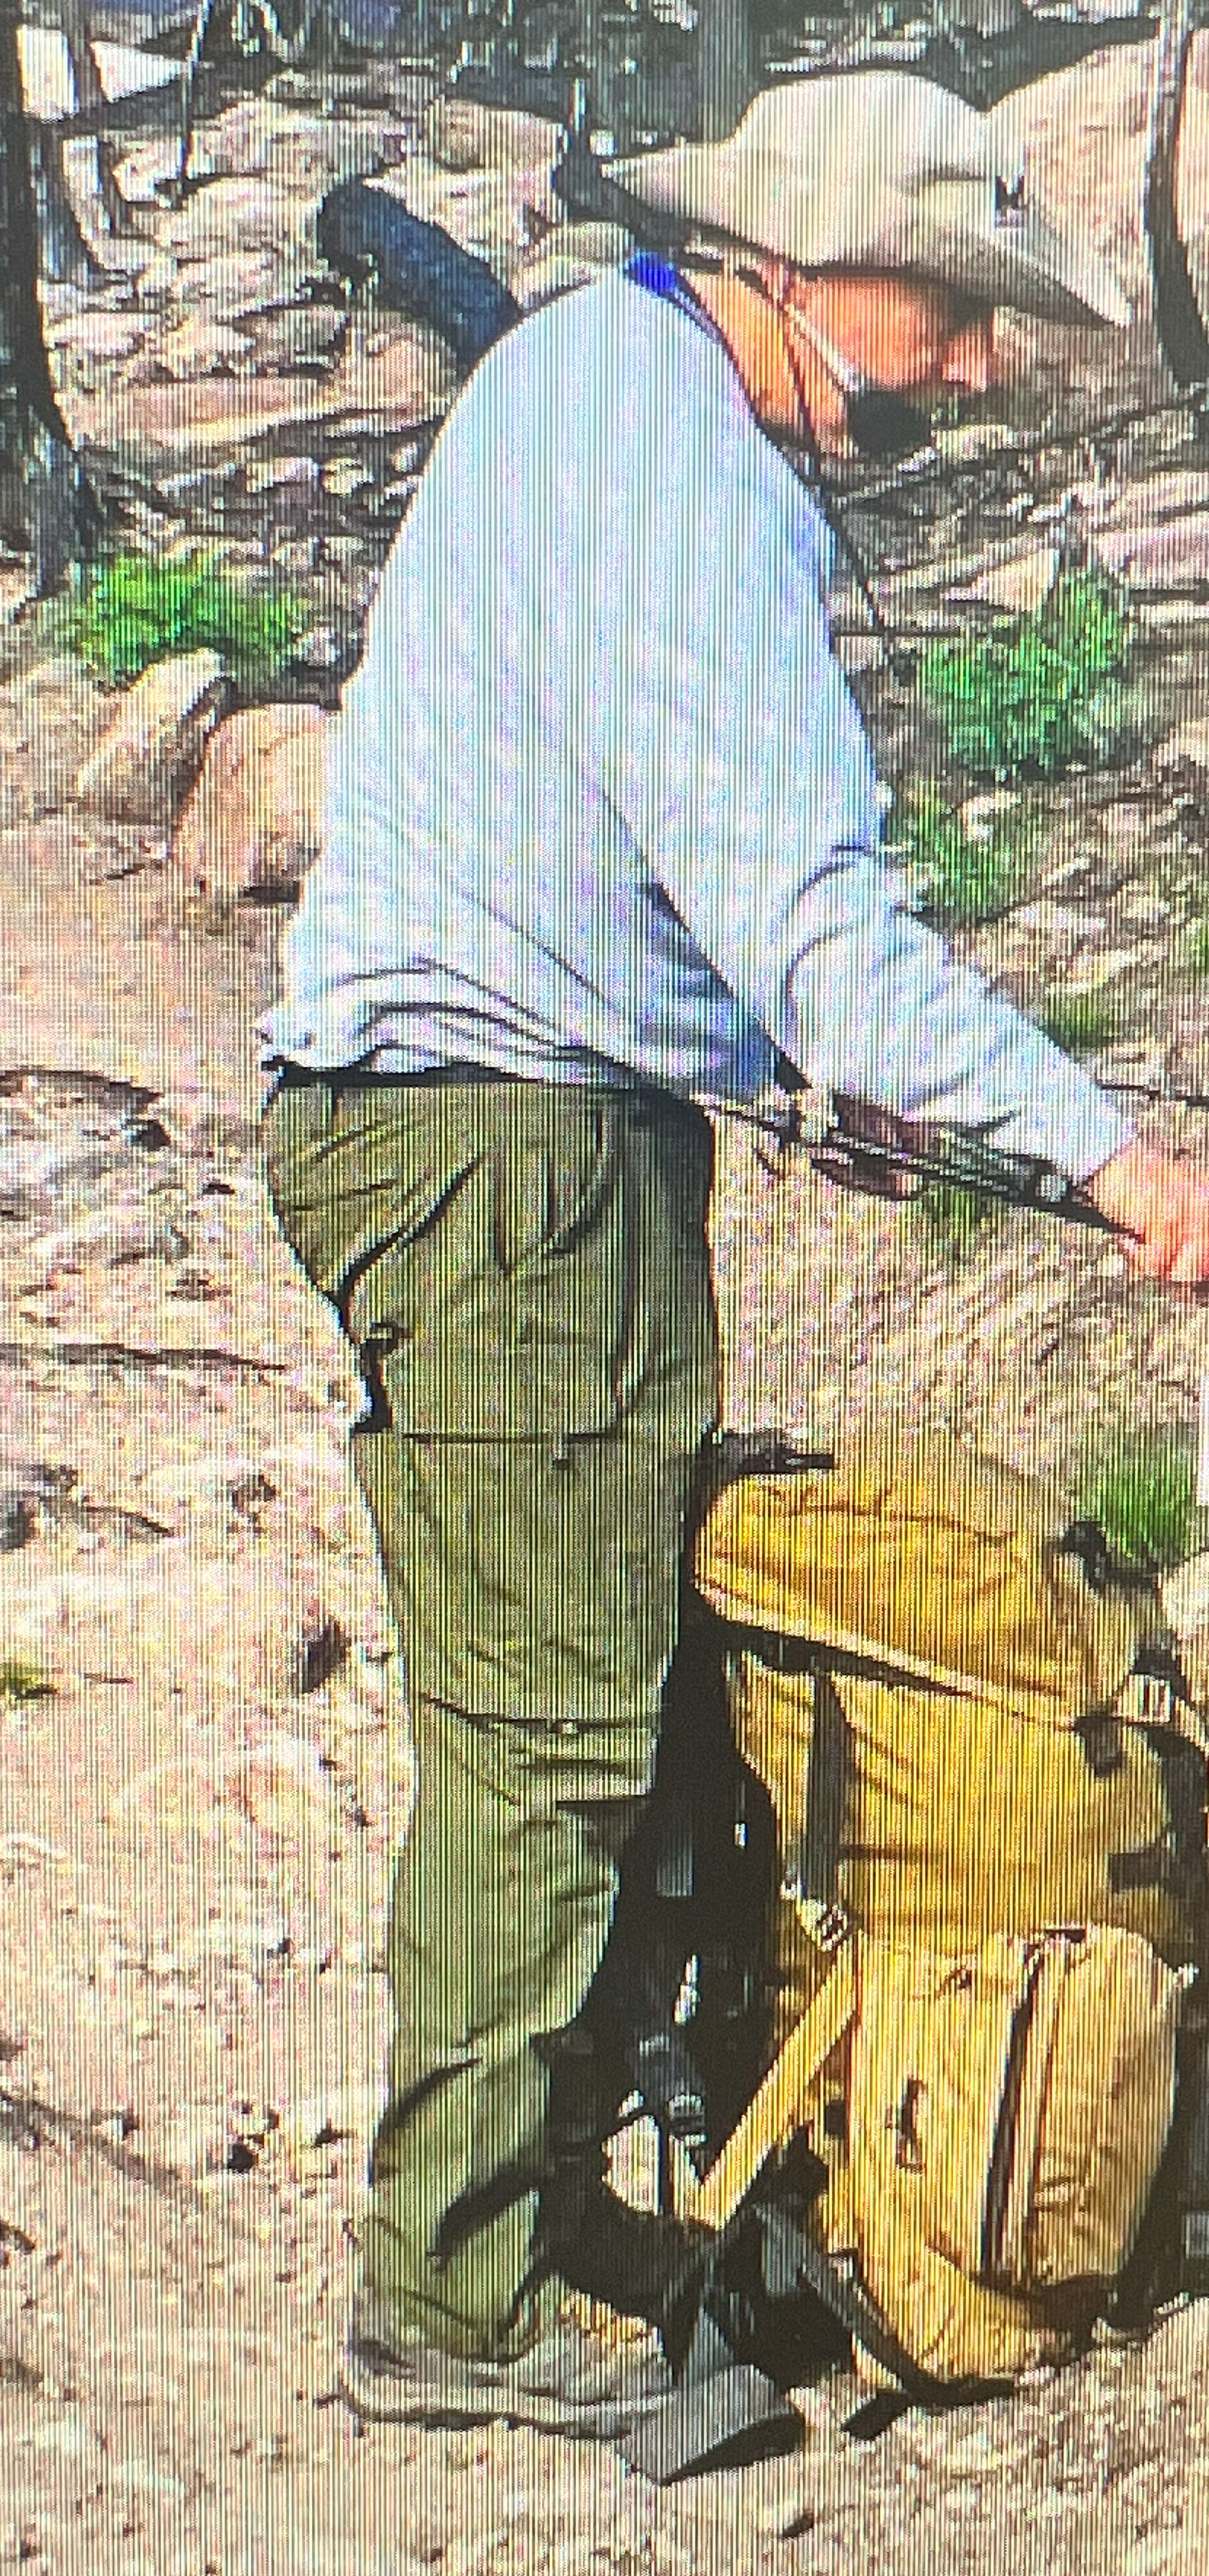 Image 2: side profile of a man in hiking gear